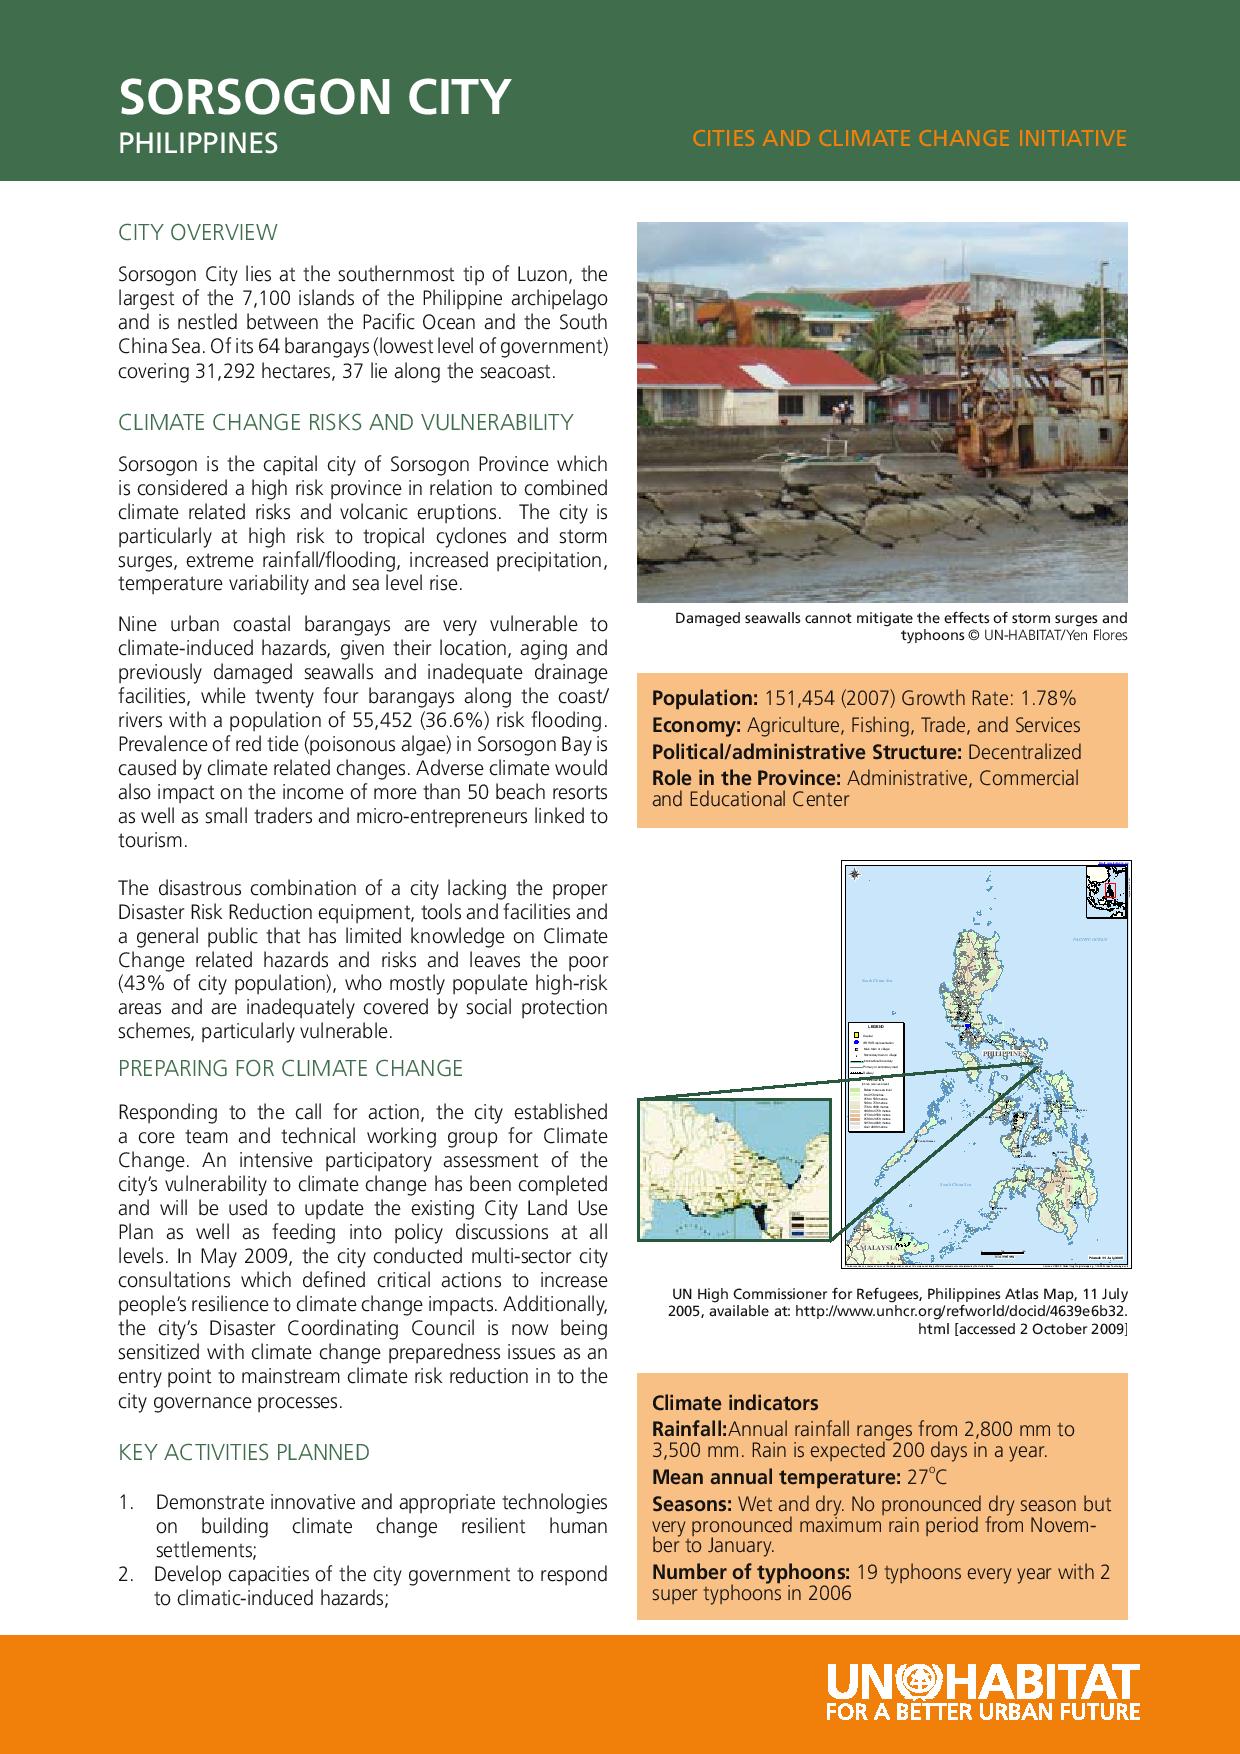 Sorsogon City, Philippines: CCCI Overview (October 2009)